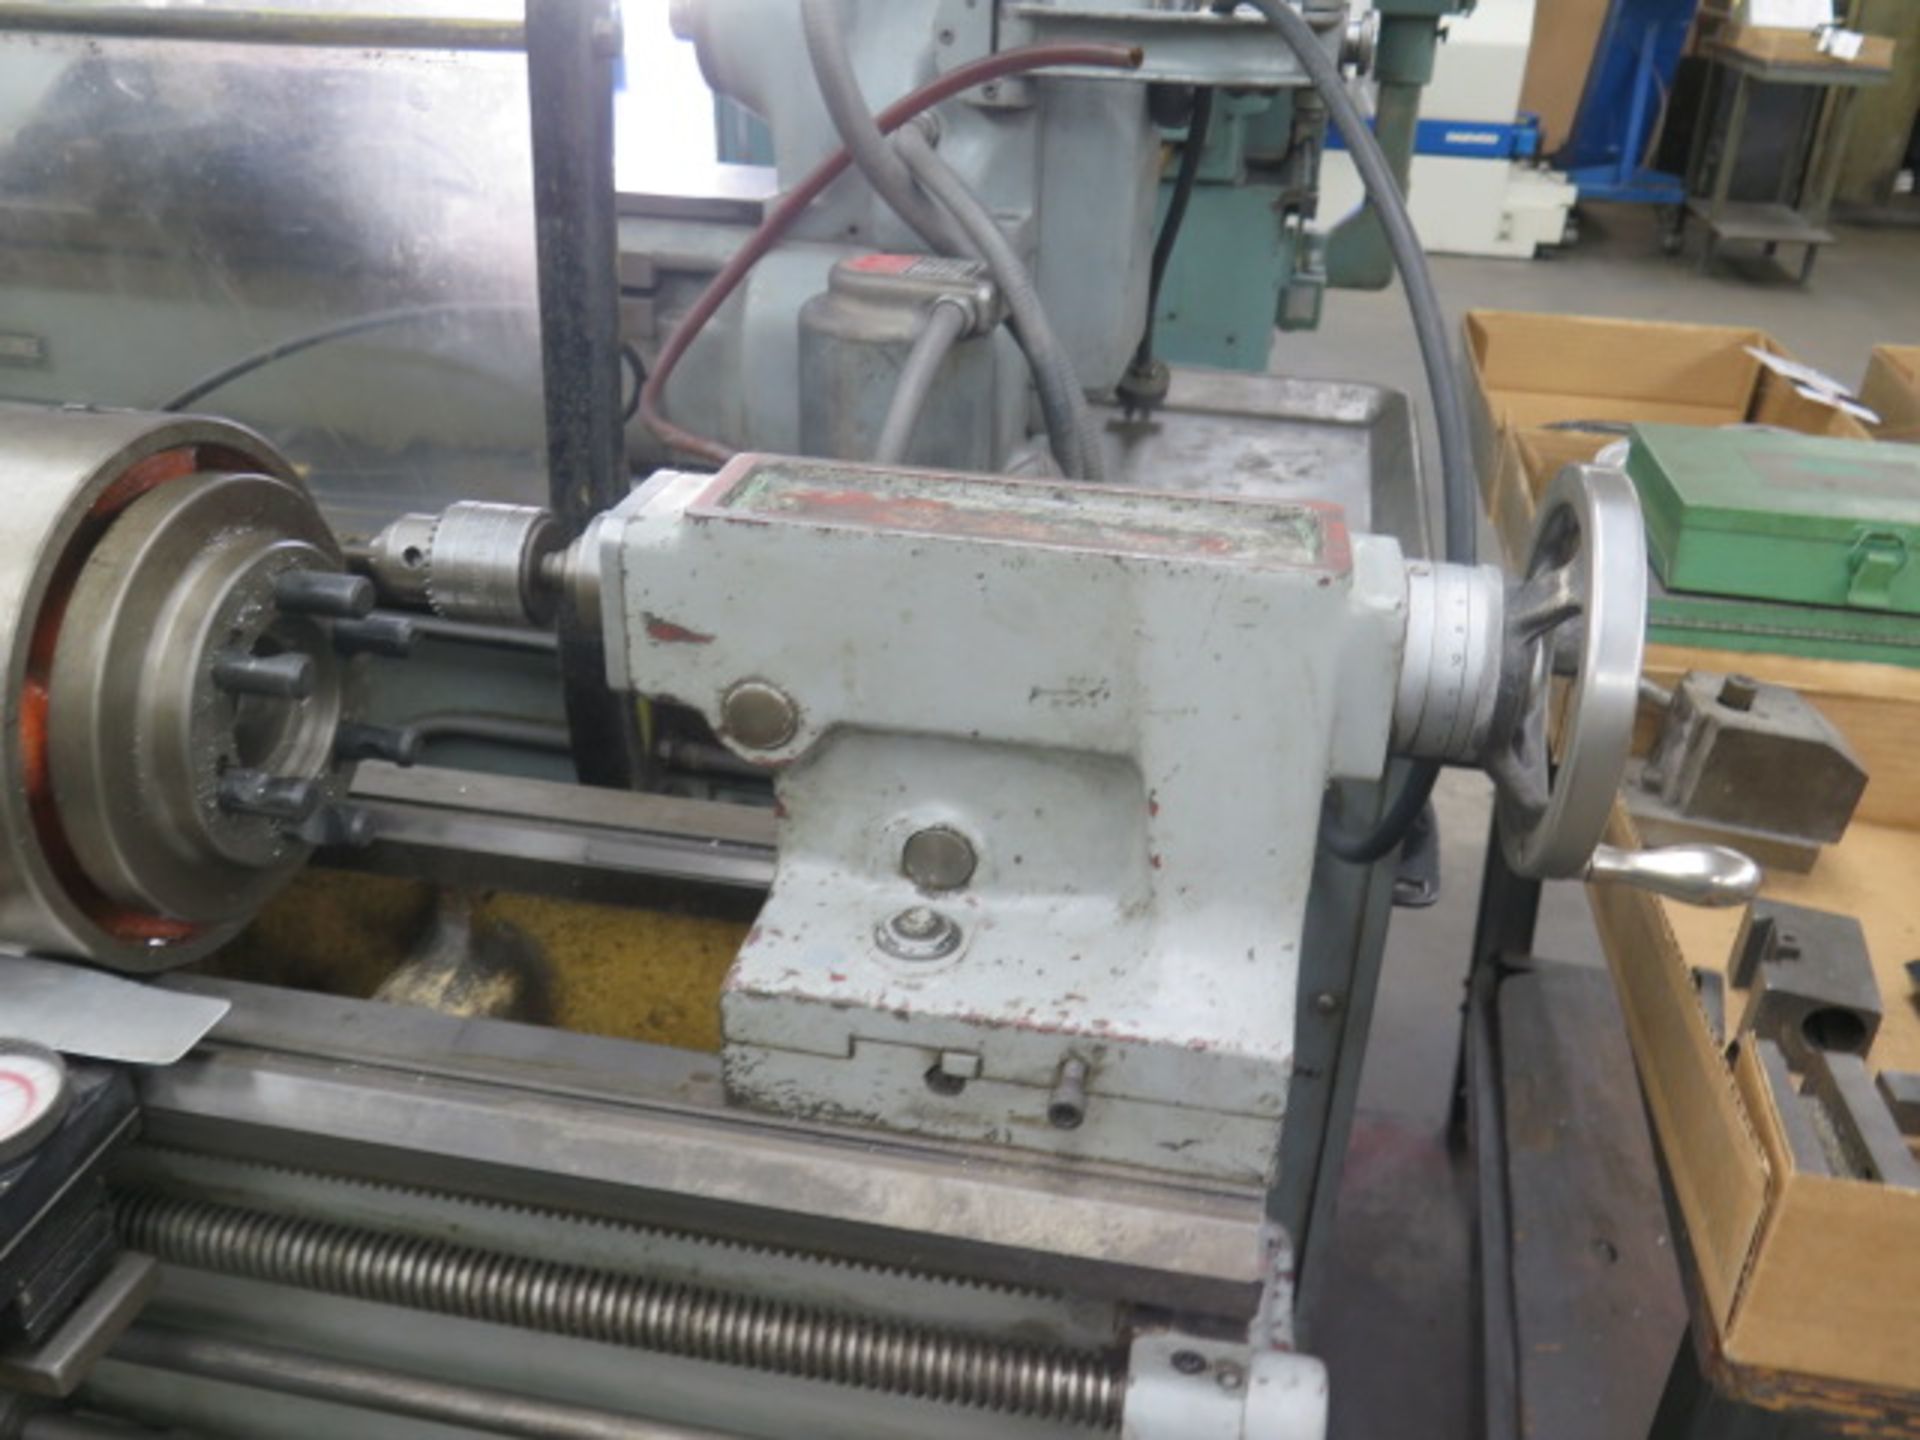 Sharp 1528 15” x 28” Geared Head Gap Bed Lathe s/n 922 w/ 83-1800 RPM, Inch/mm Threading, SOLD AS IS - Image 9 of 12